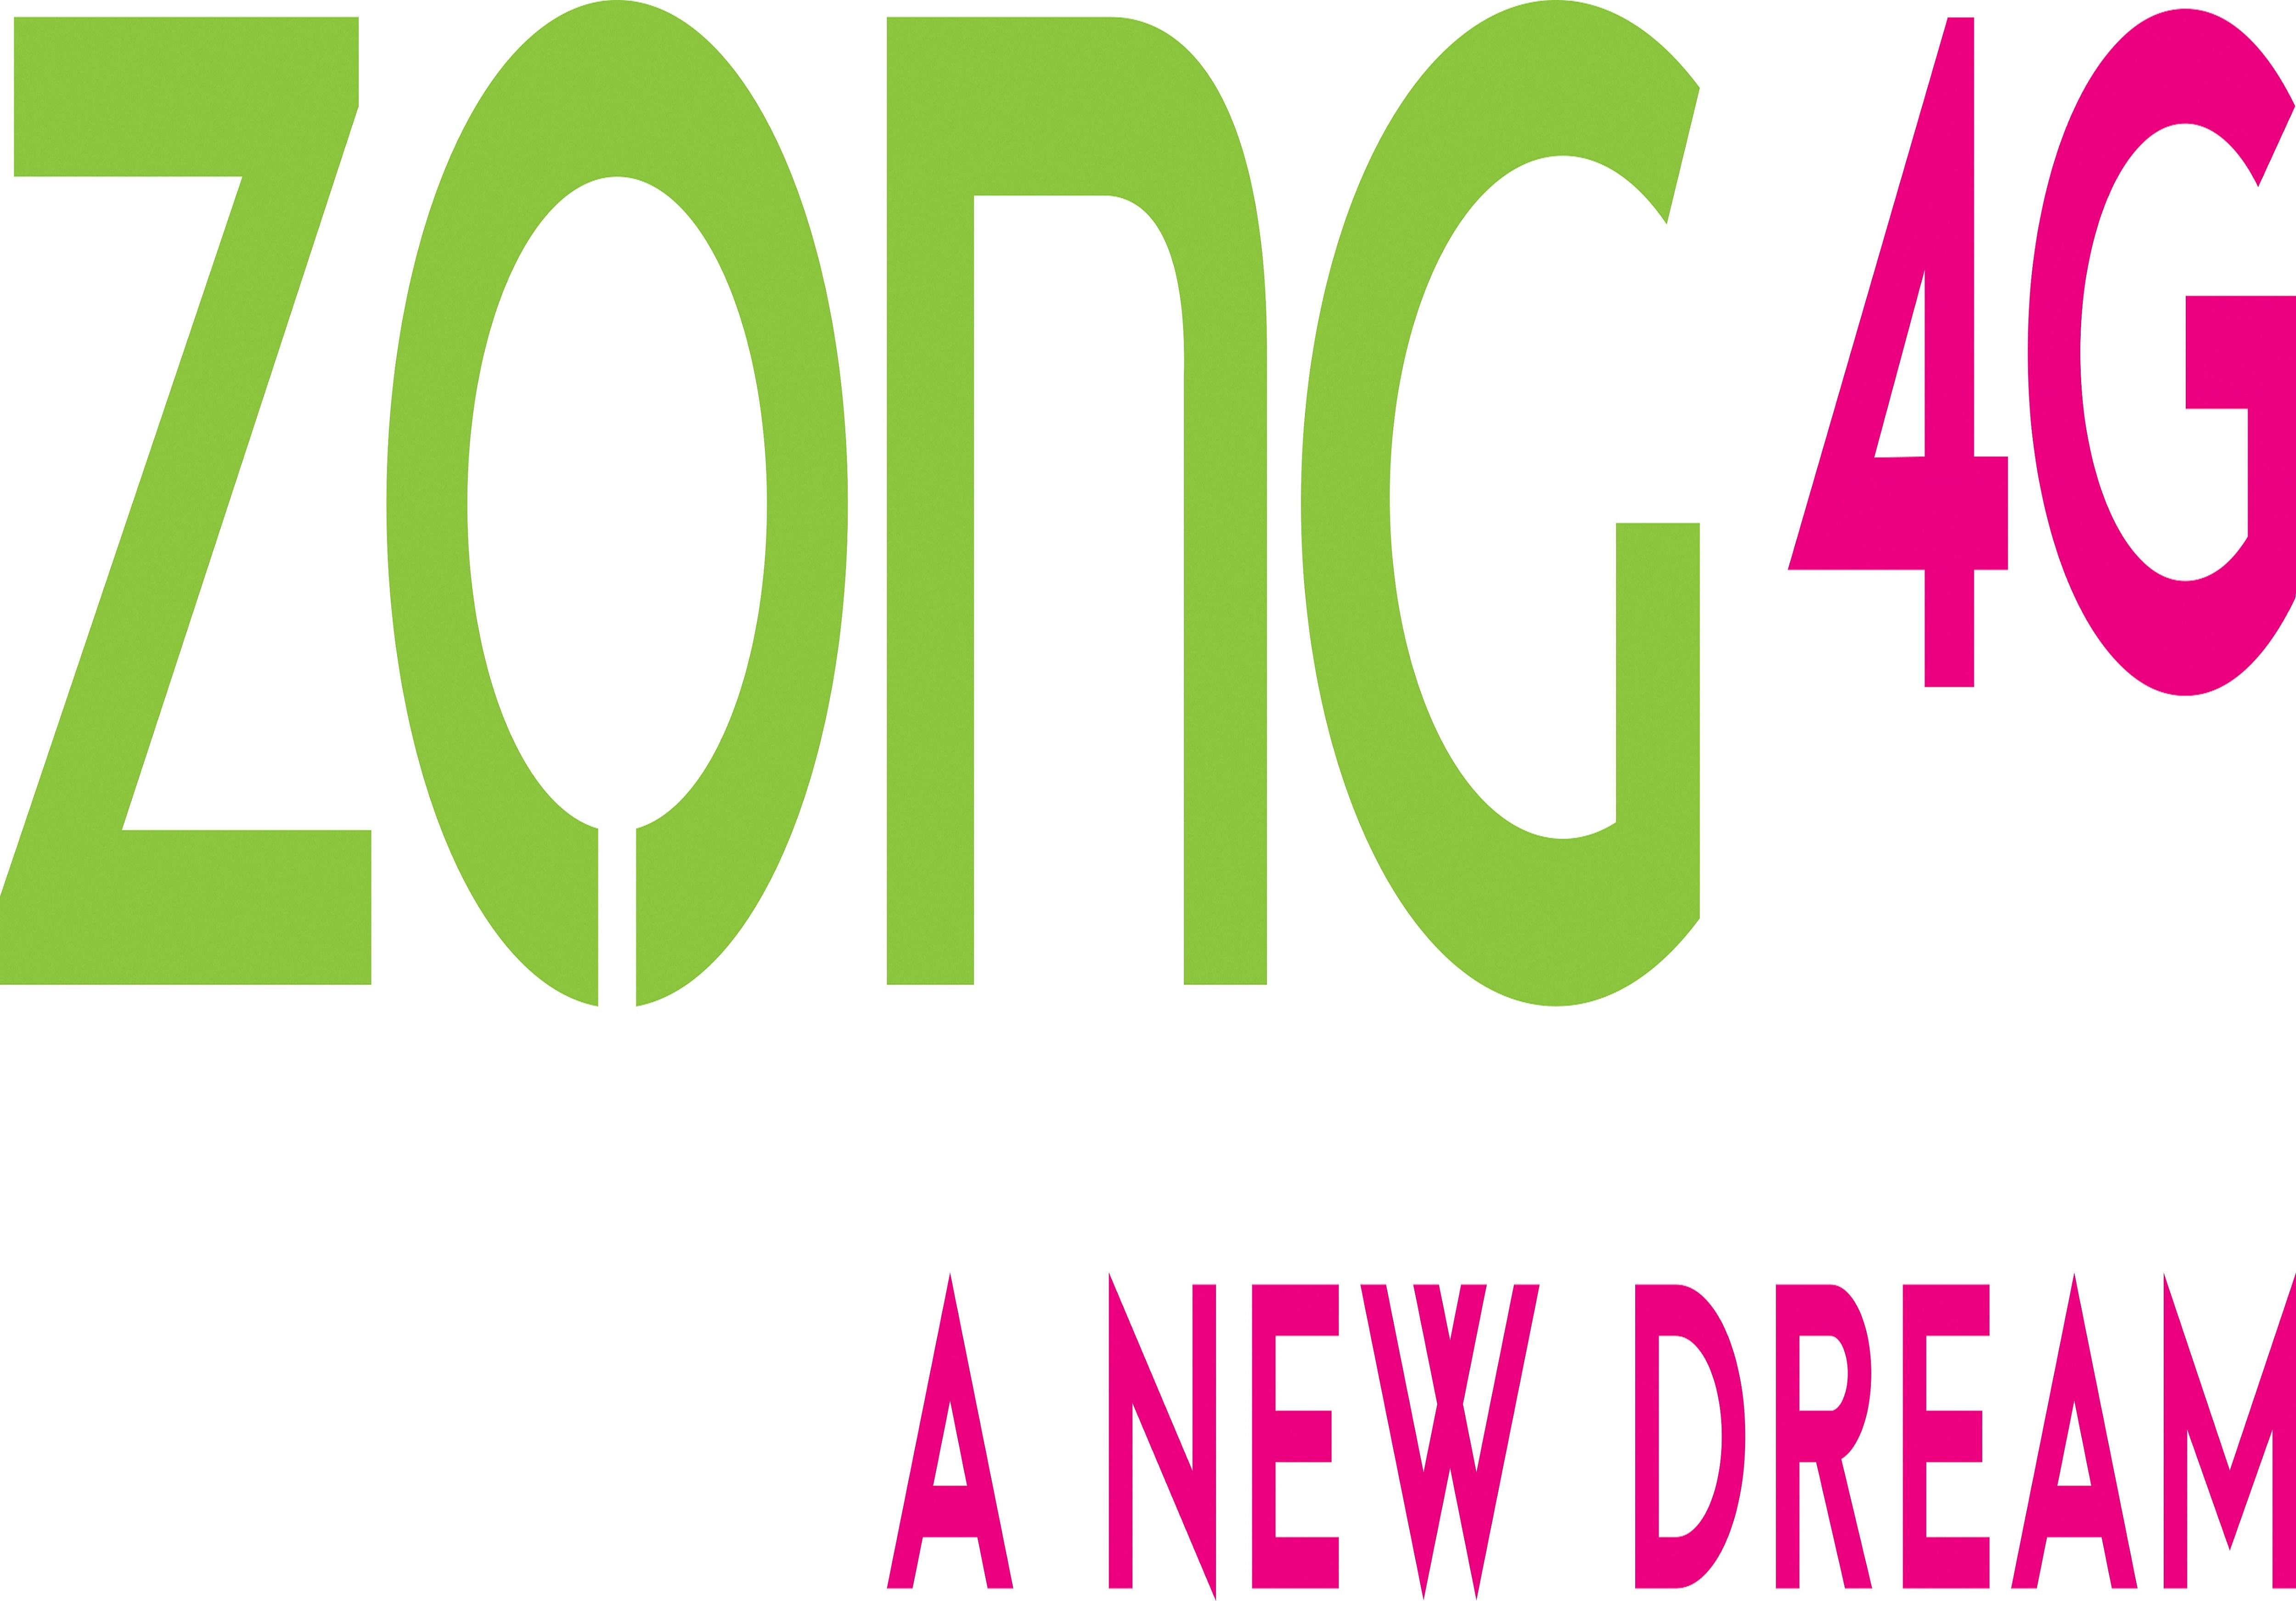 Zong4G Continues the Investment for 4G Ecosystem Development